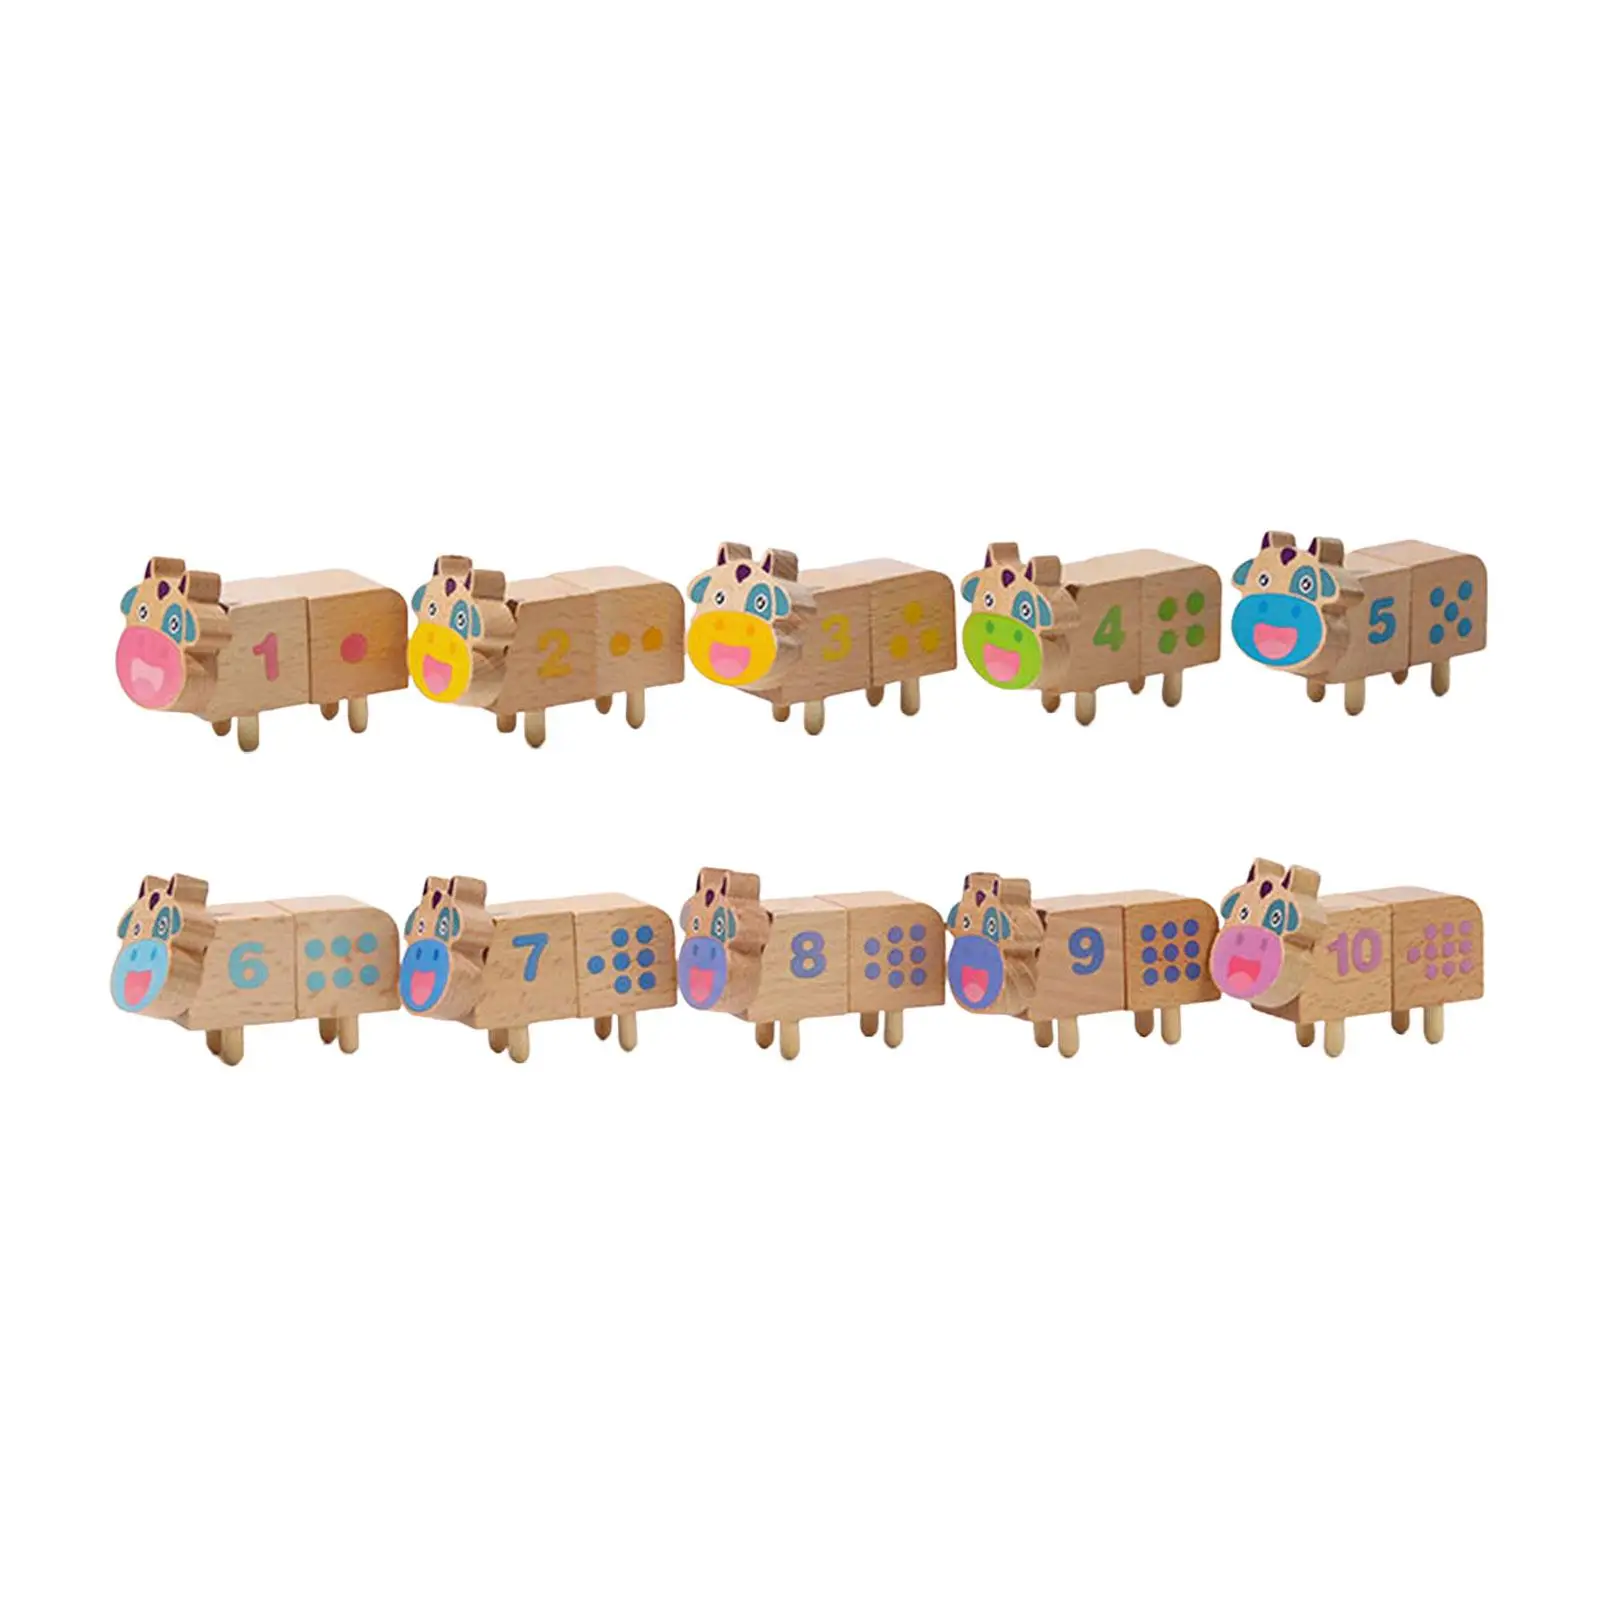 10Pcs Wooden Building Blocks for Toddlers Stacking Games Preschool Learning Activities Alphabet Number Stacking Blocks Gifts